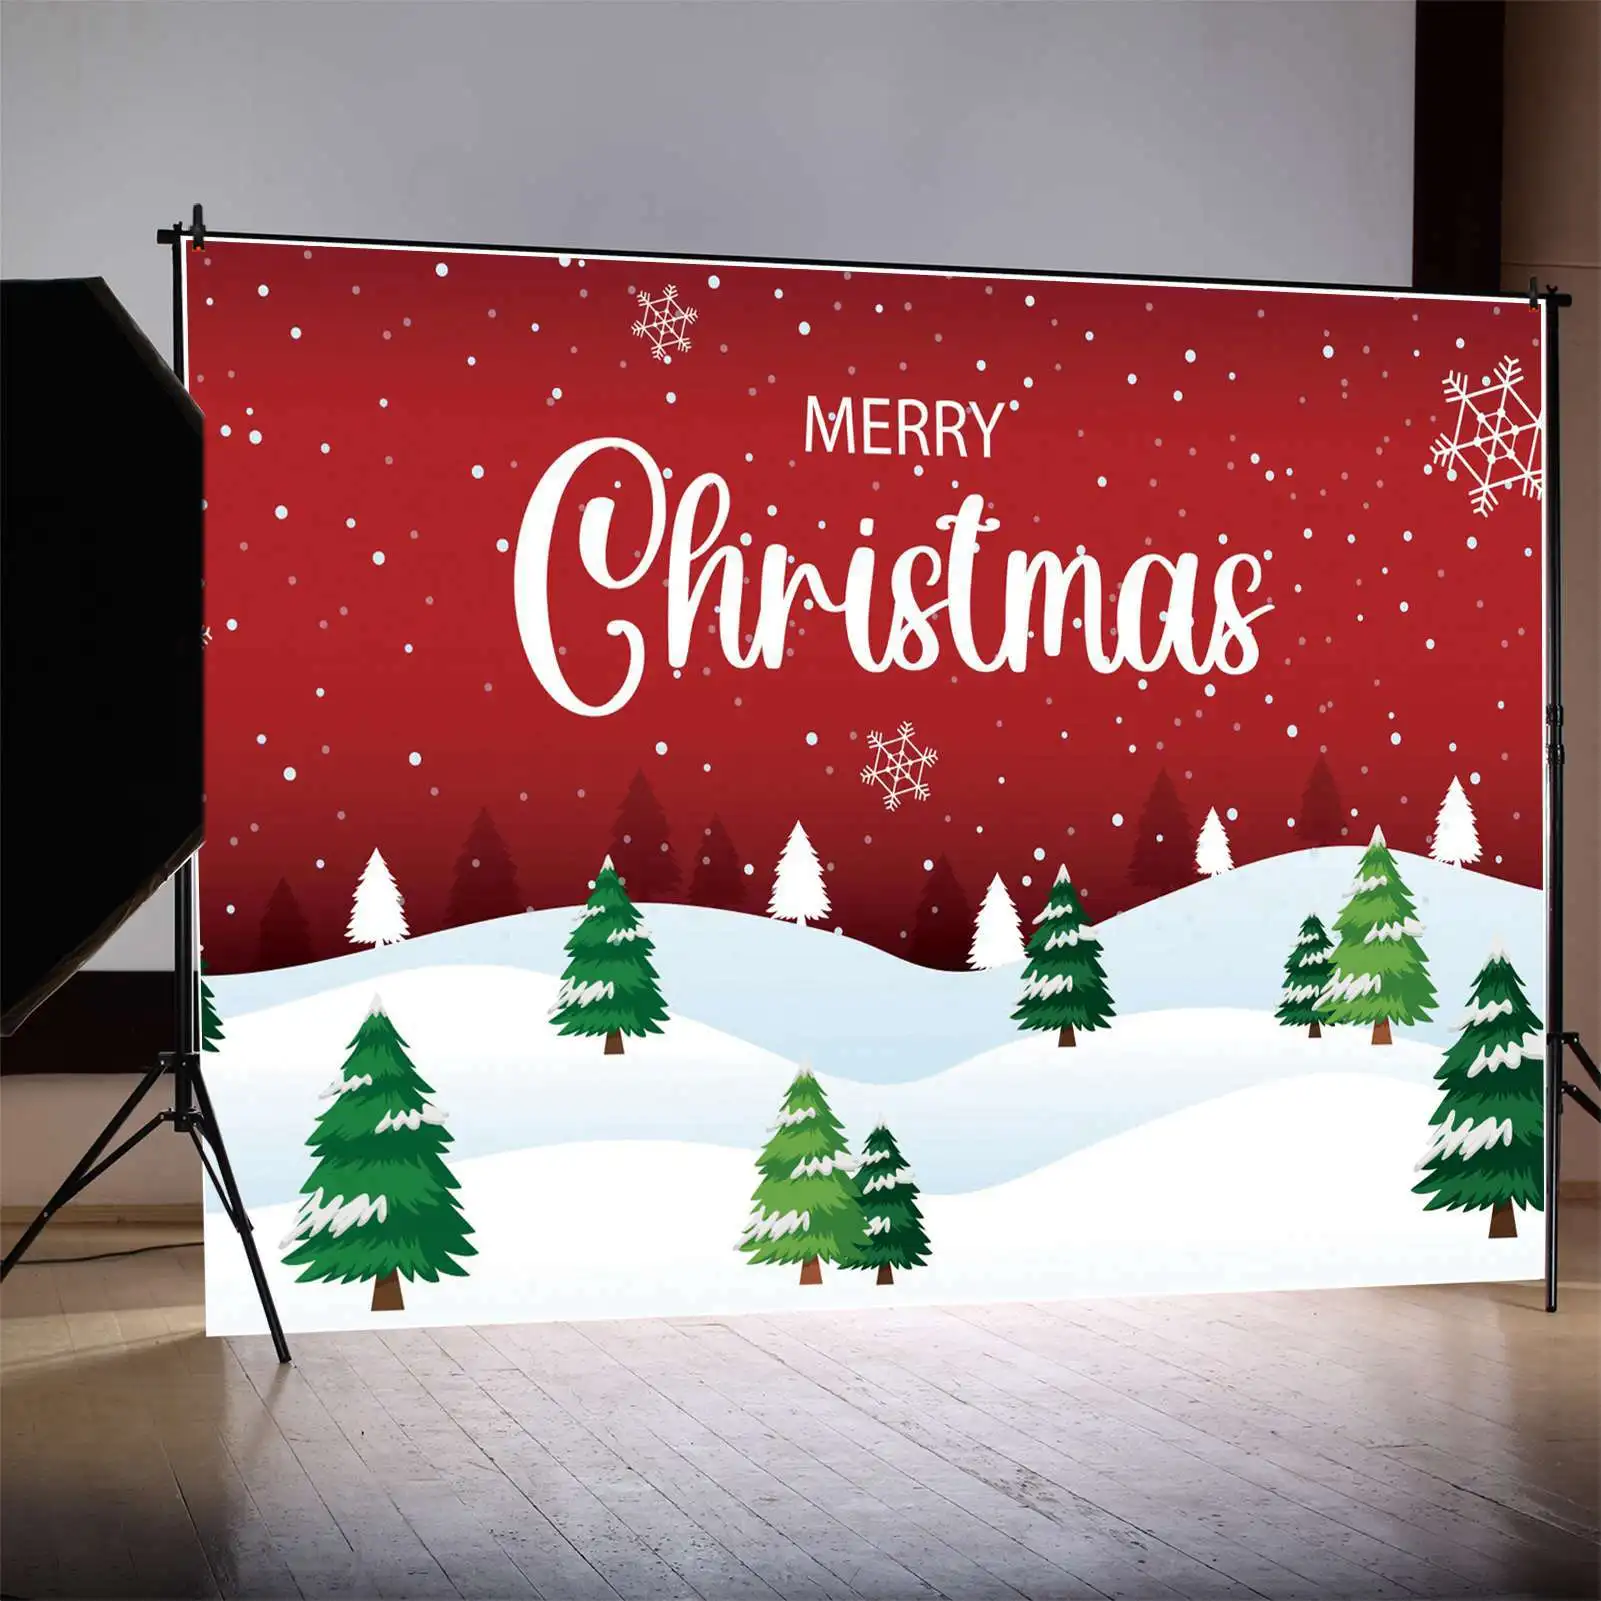 

MOON.QG Backdrop Snowflake Merry Christmas Banner Poster Red Party Wall Decor Background White Snow Field Pine Tree Photo Booth